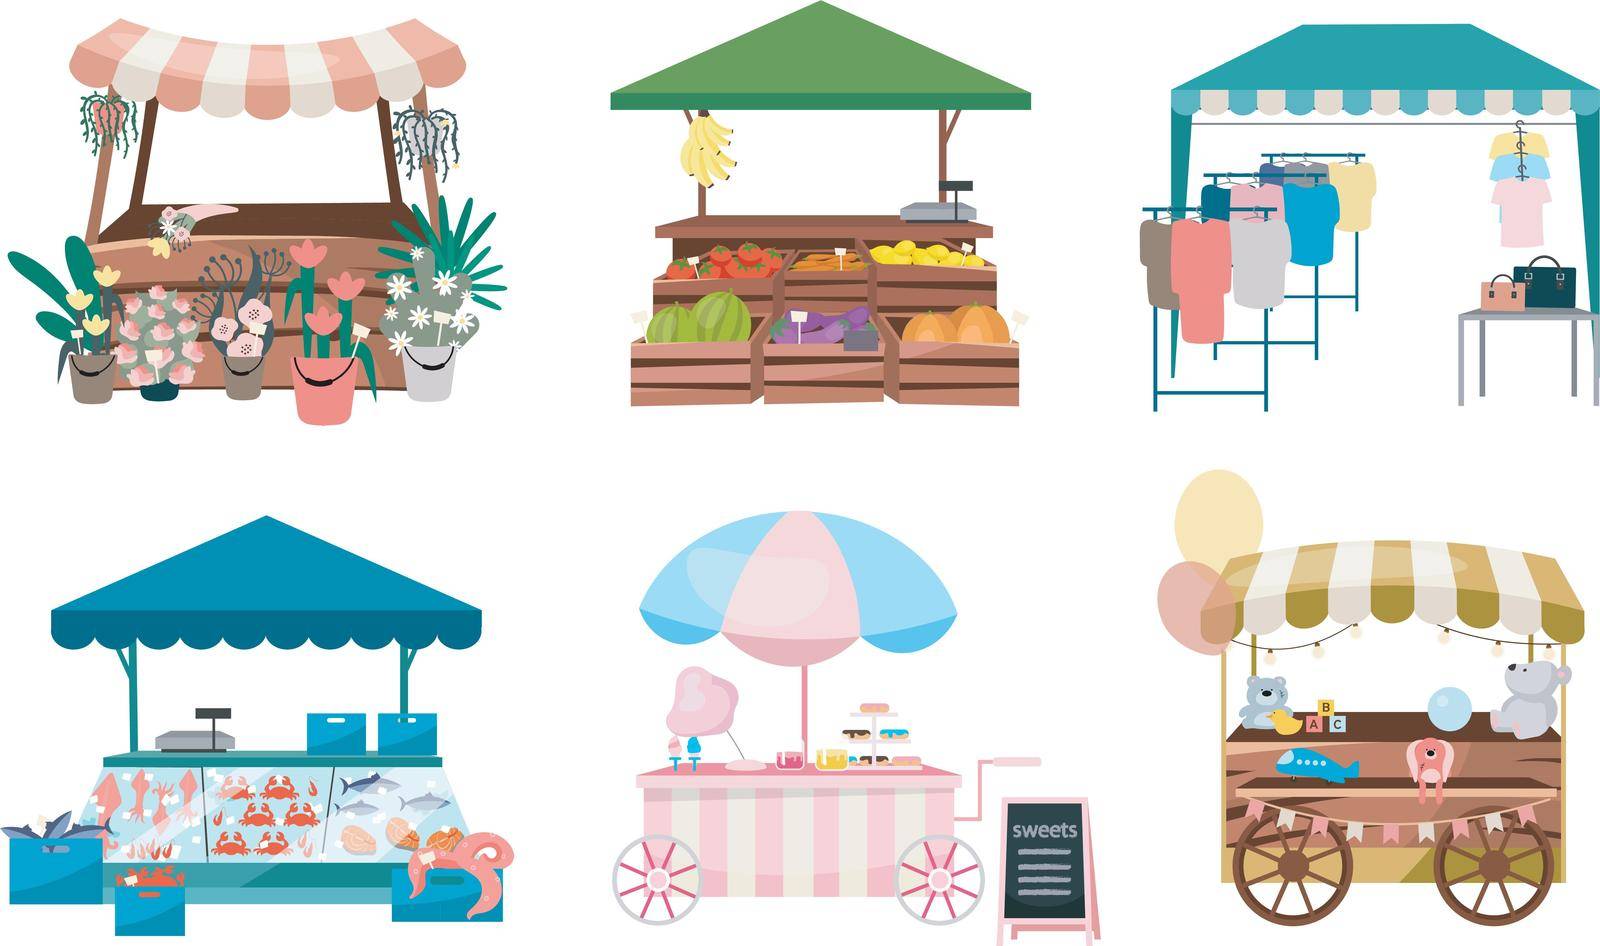 Market stalls flat vector illustrations set. Fair, funfair trade tents, outdoor kiosks and carts. Street shopping places cartoon concepts. Summer market counters for flowers, vegetables, clothes goods by ntl